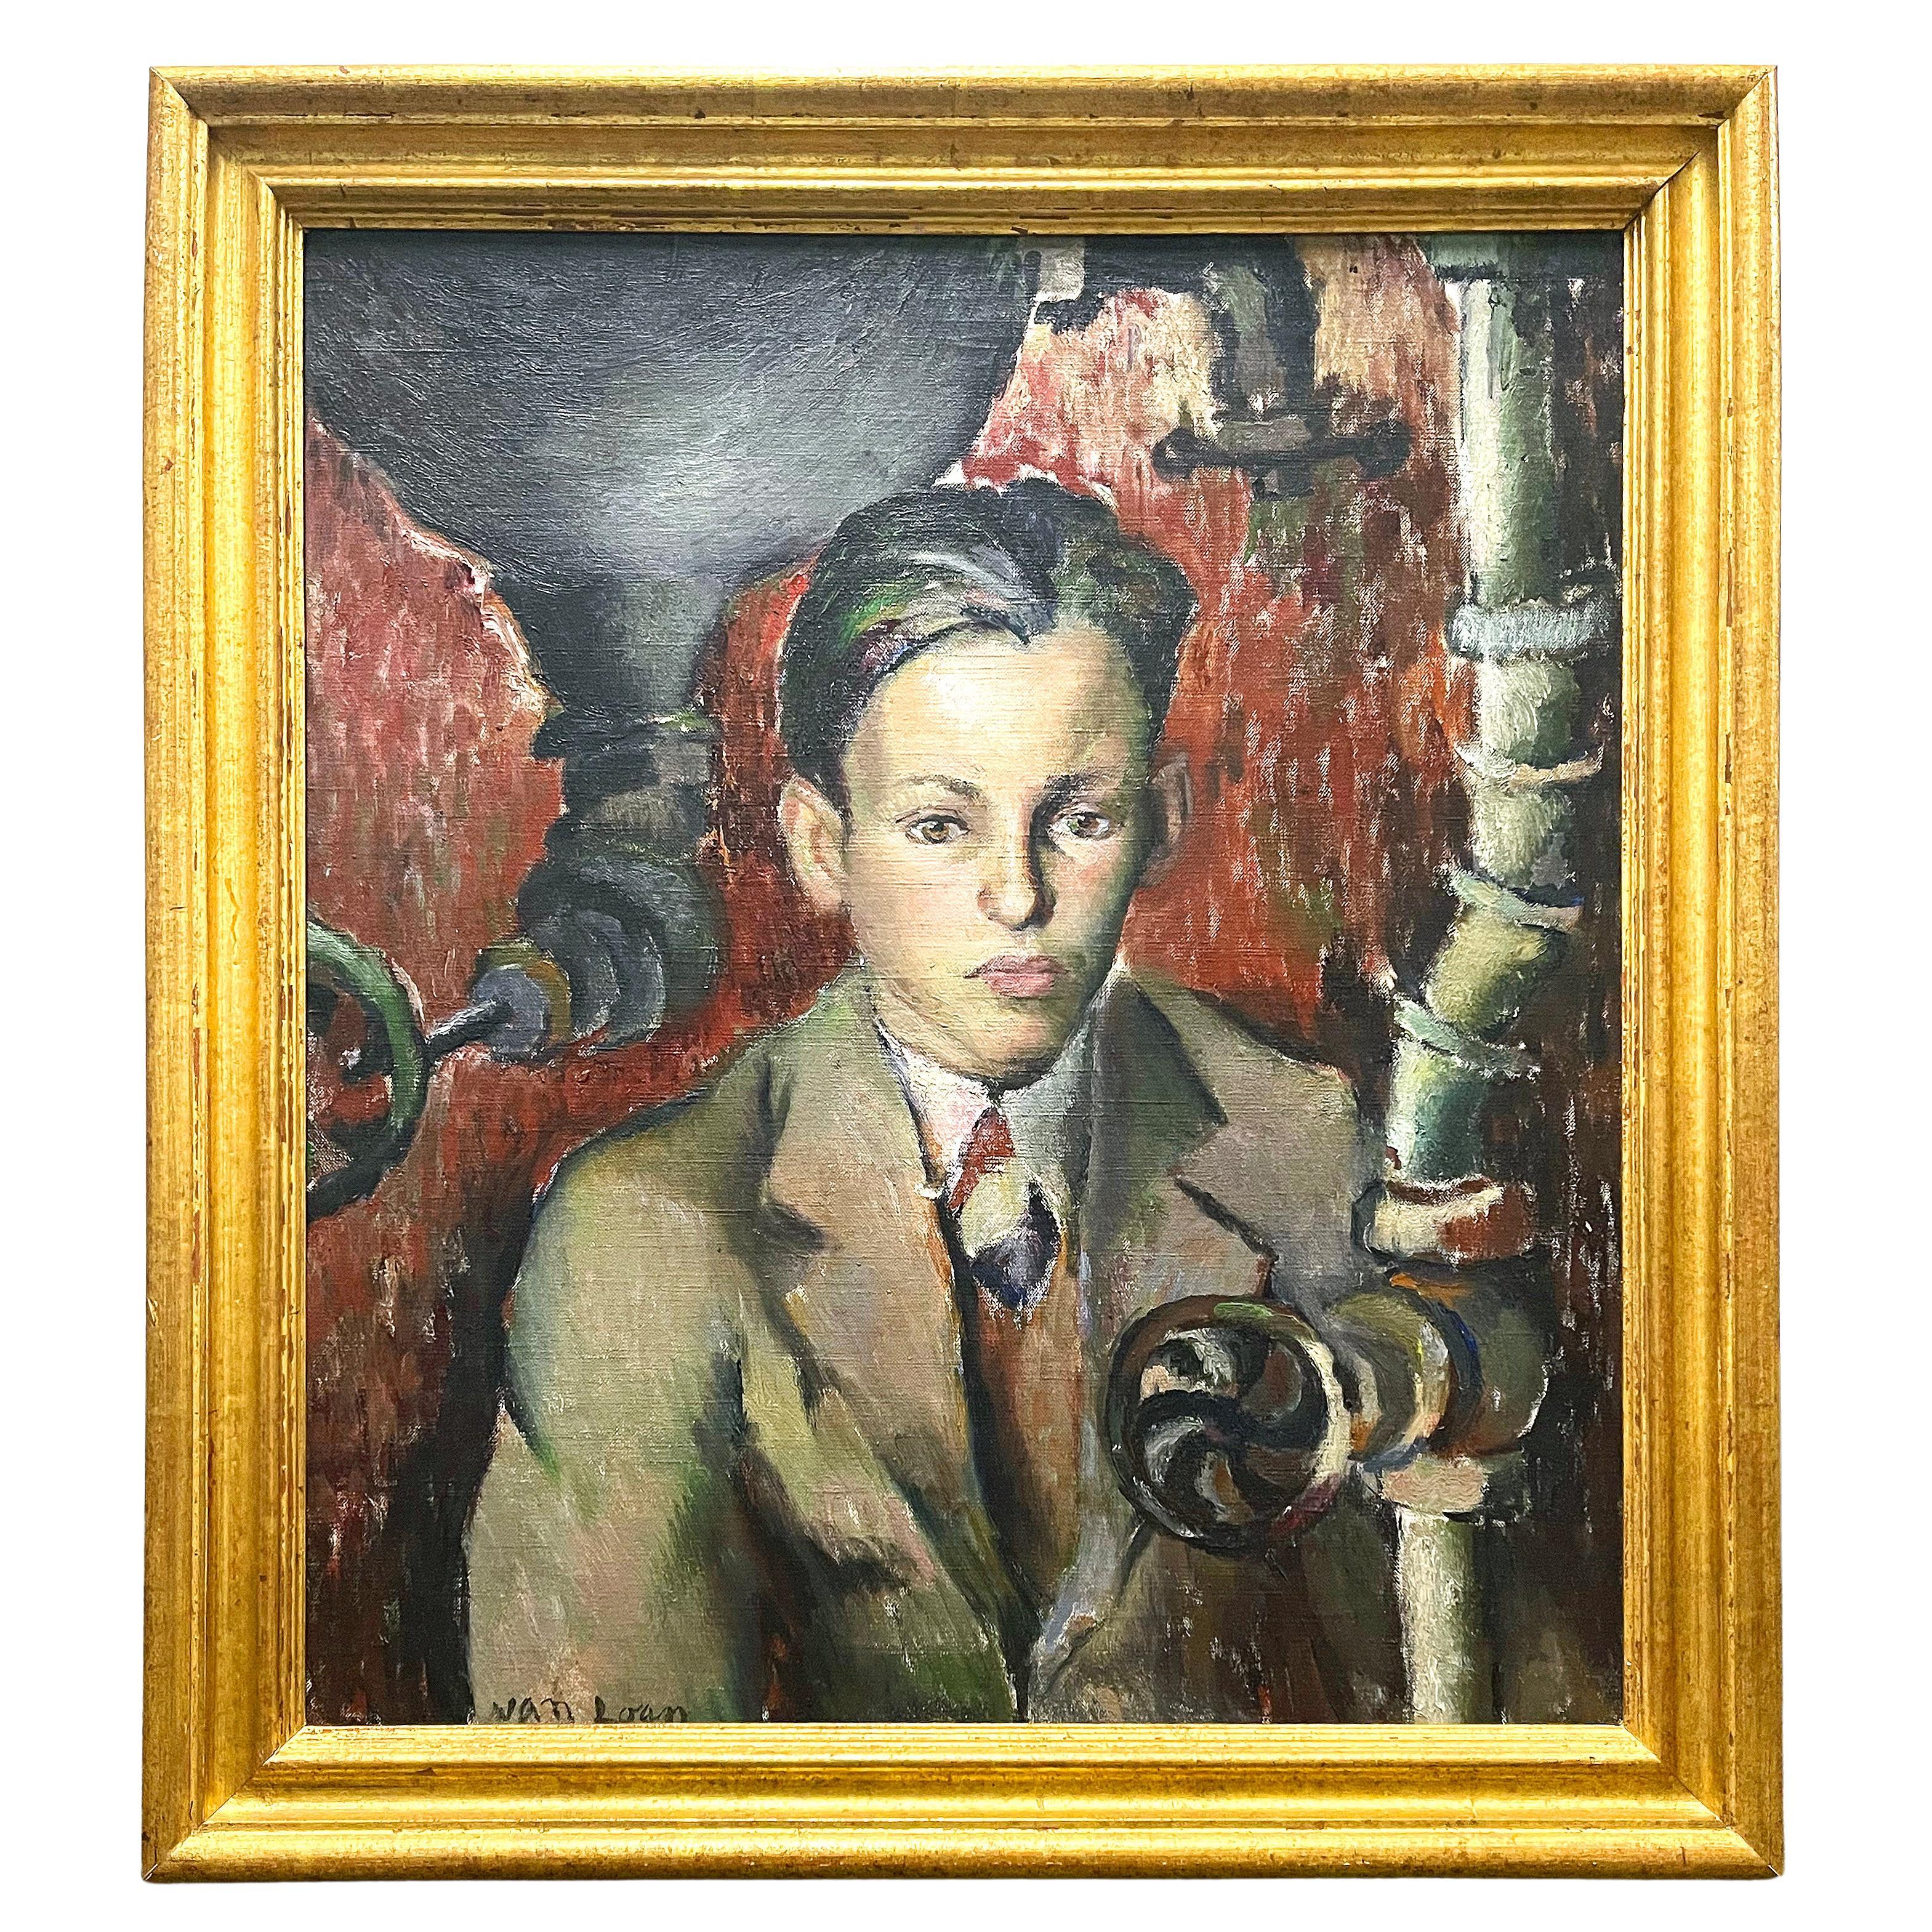 "Youth with Pipes and Valves, " Portrait sensible d'un jeune homme, Dorothy Van Loan